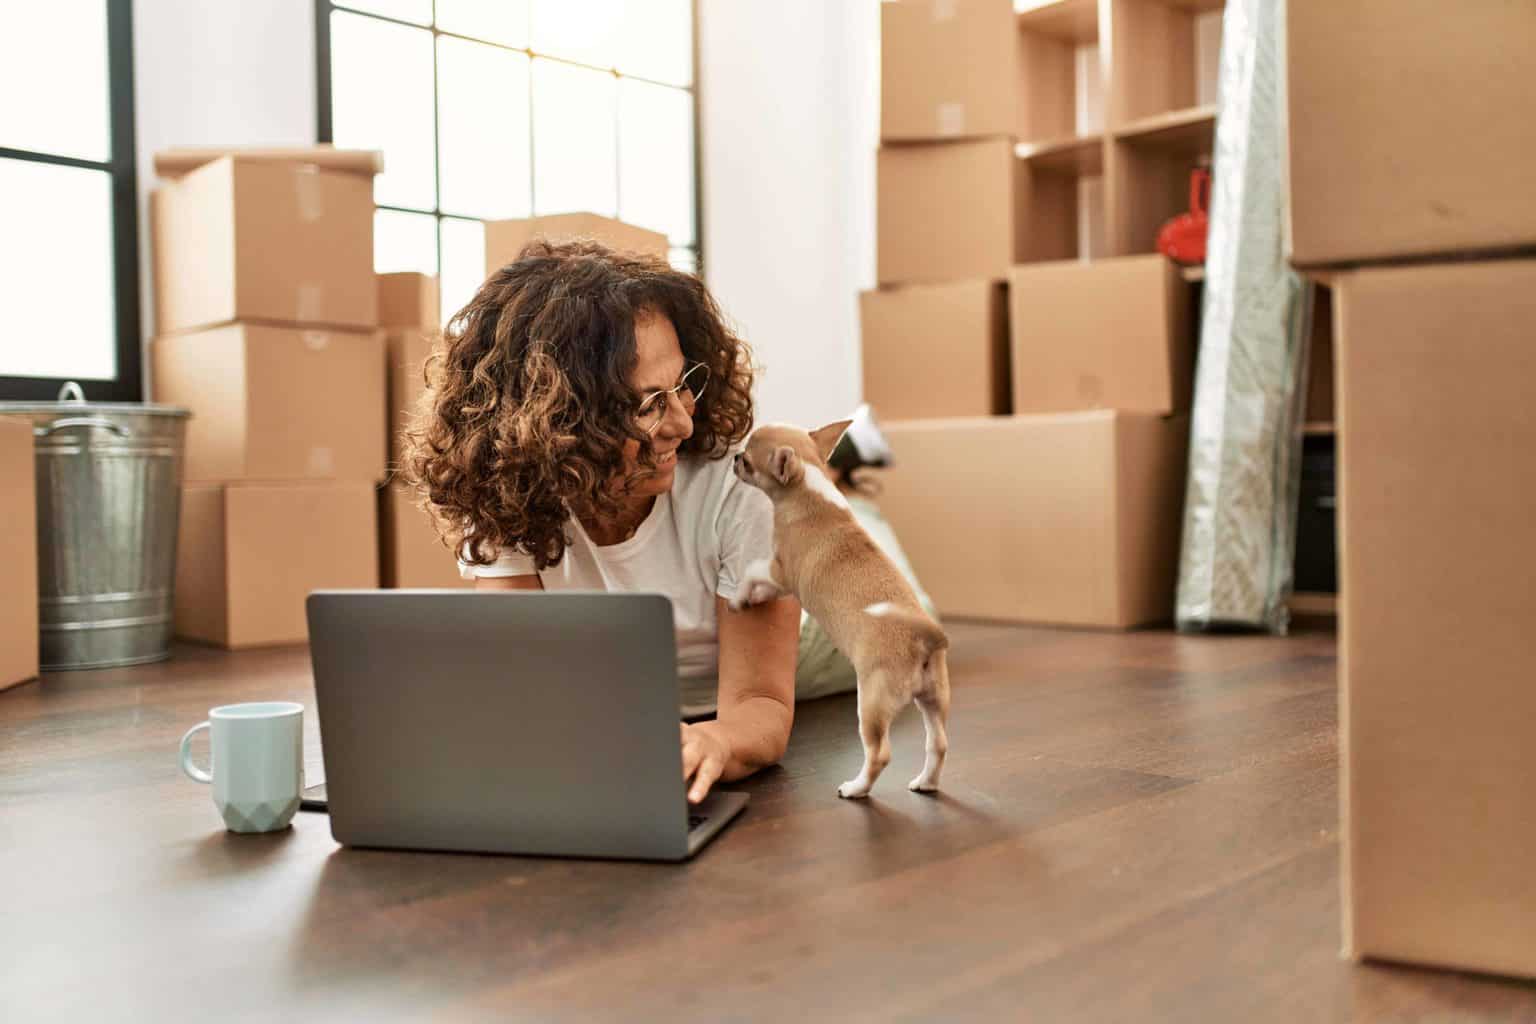 Woman with chihuahua works on her laptop. Ensure that your gadgets are out of reach when they're not in use. Place them on a table or a cabinet they cannot easily reach.